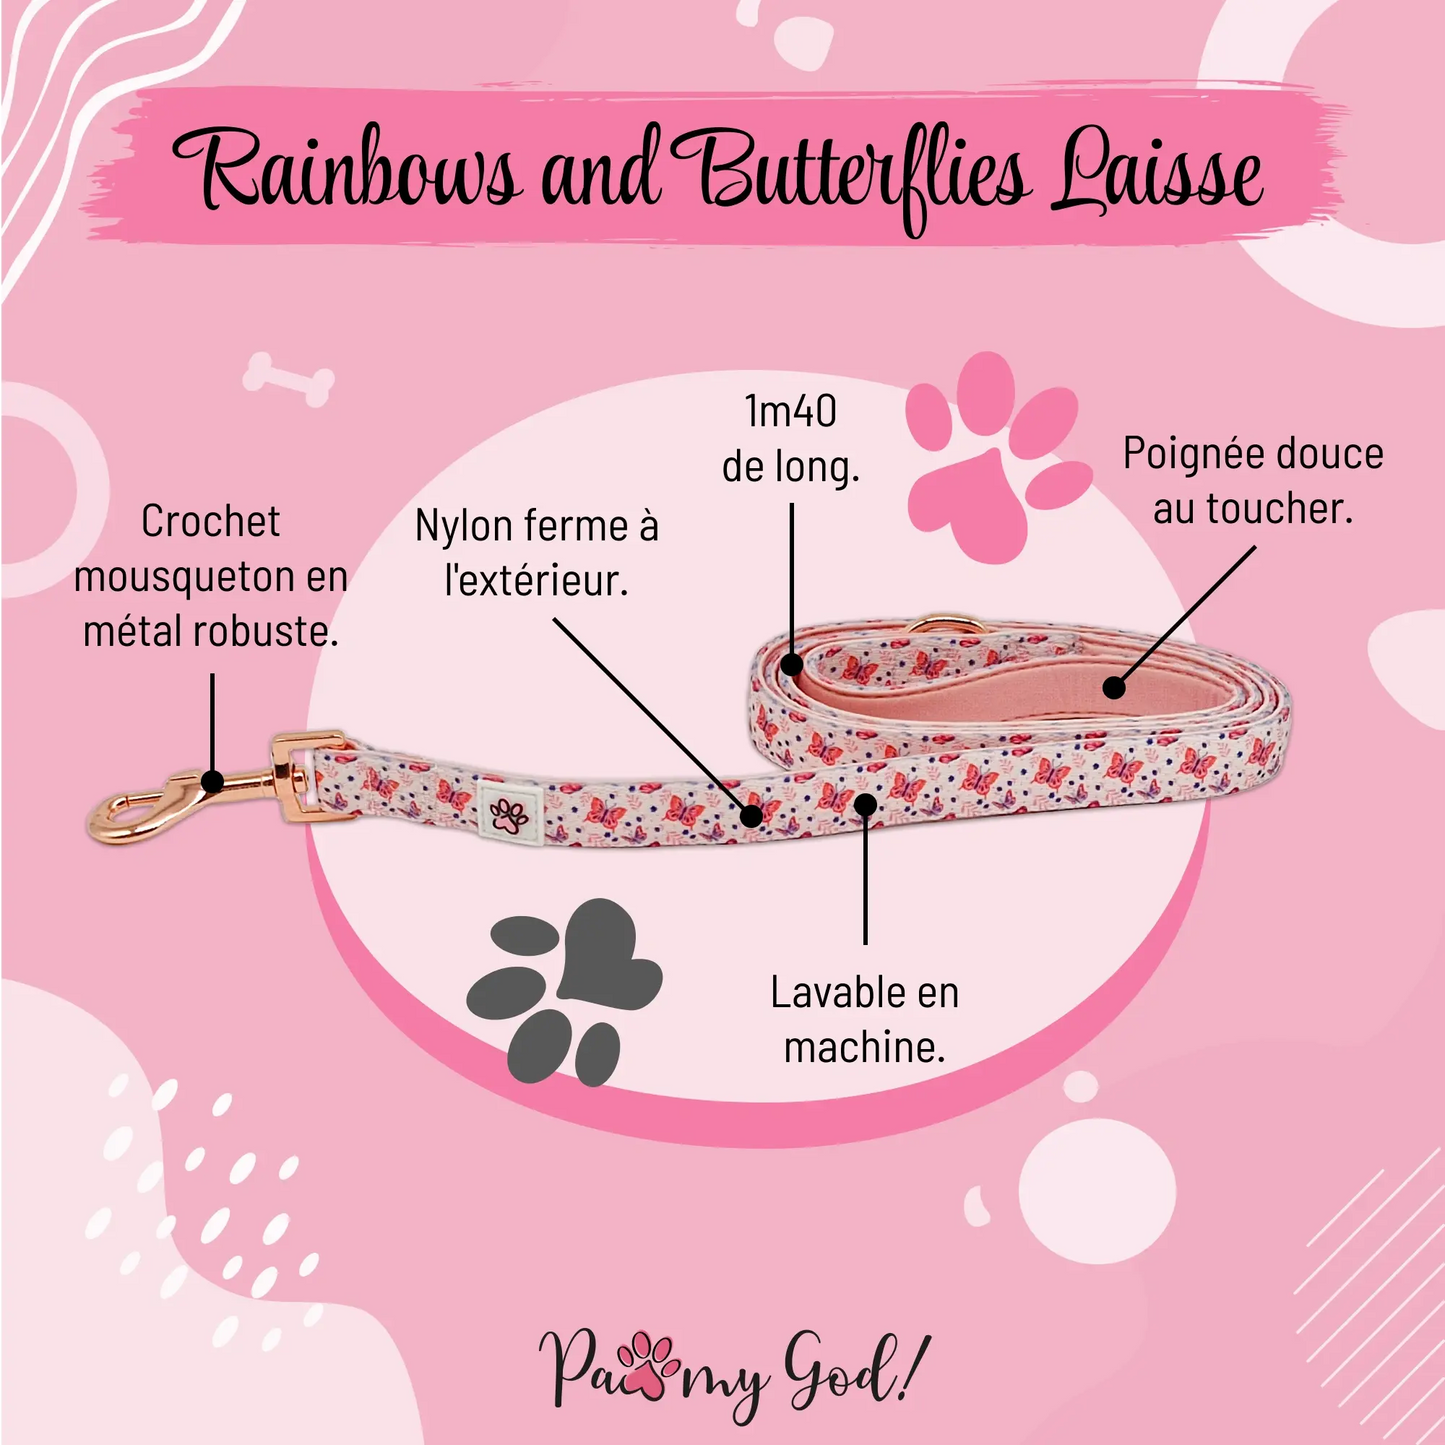 Rainbows and Butterflies Cloth Leash Features